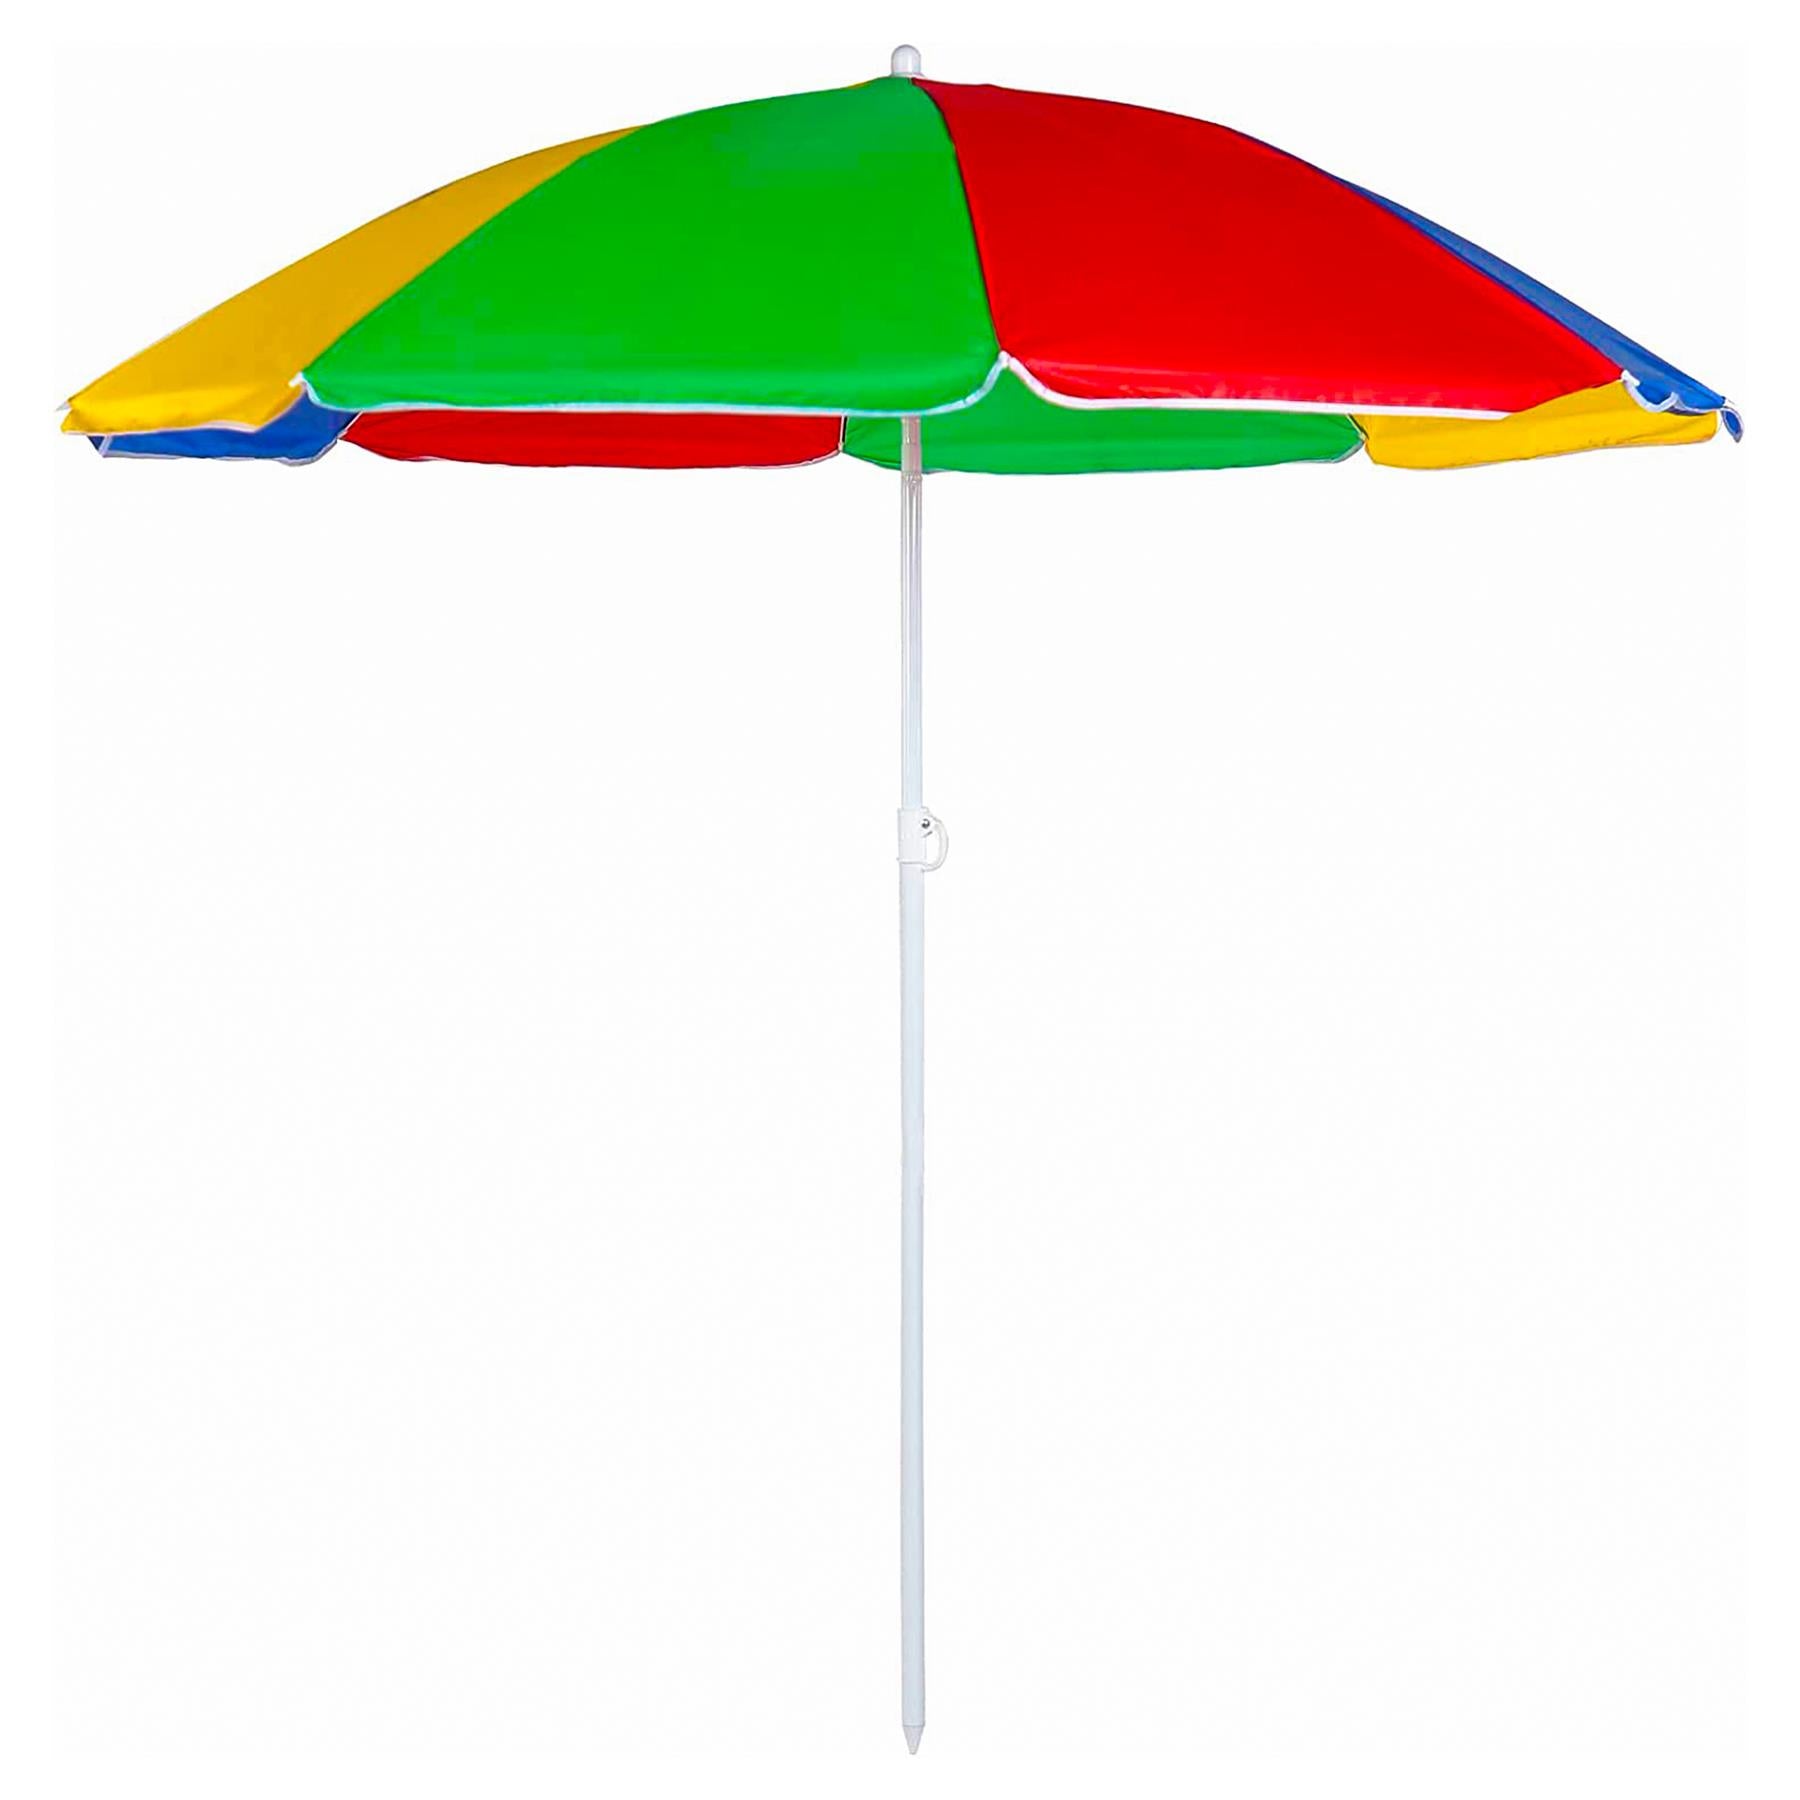 Multi-Coloured Beach Tilting Parasol 1.6M by The Magic Toy Shop - UKBuyZone